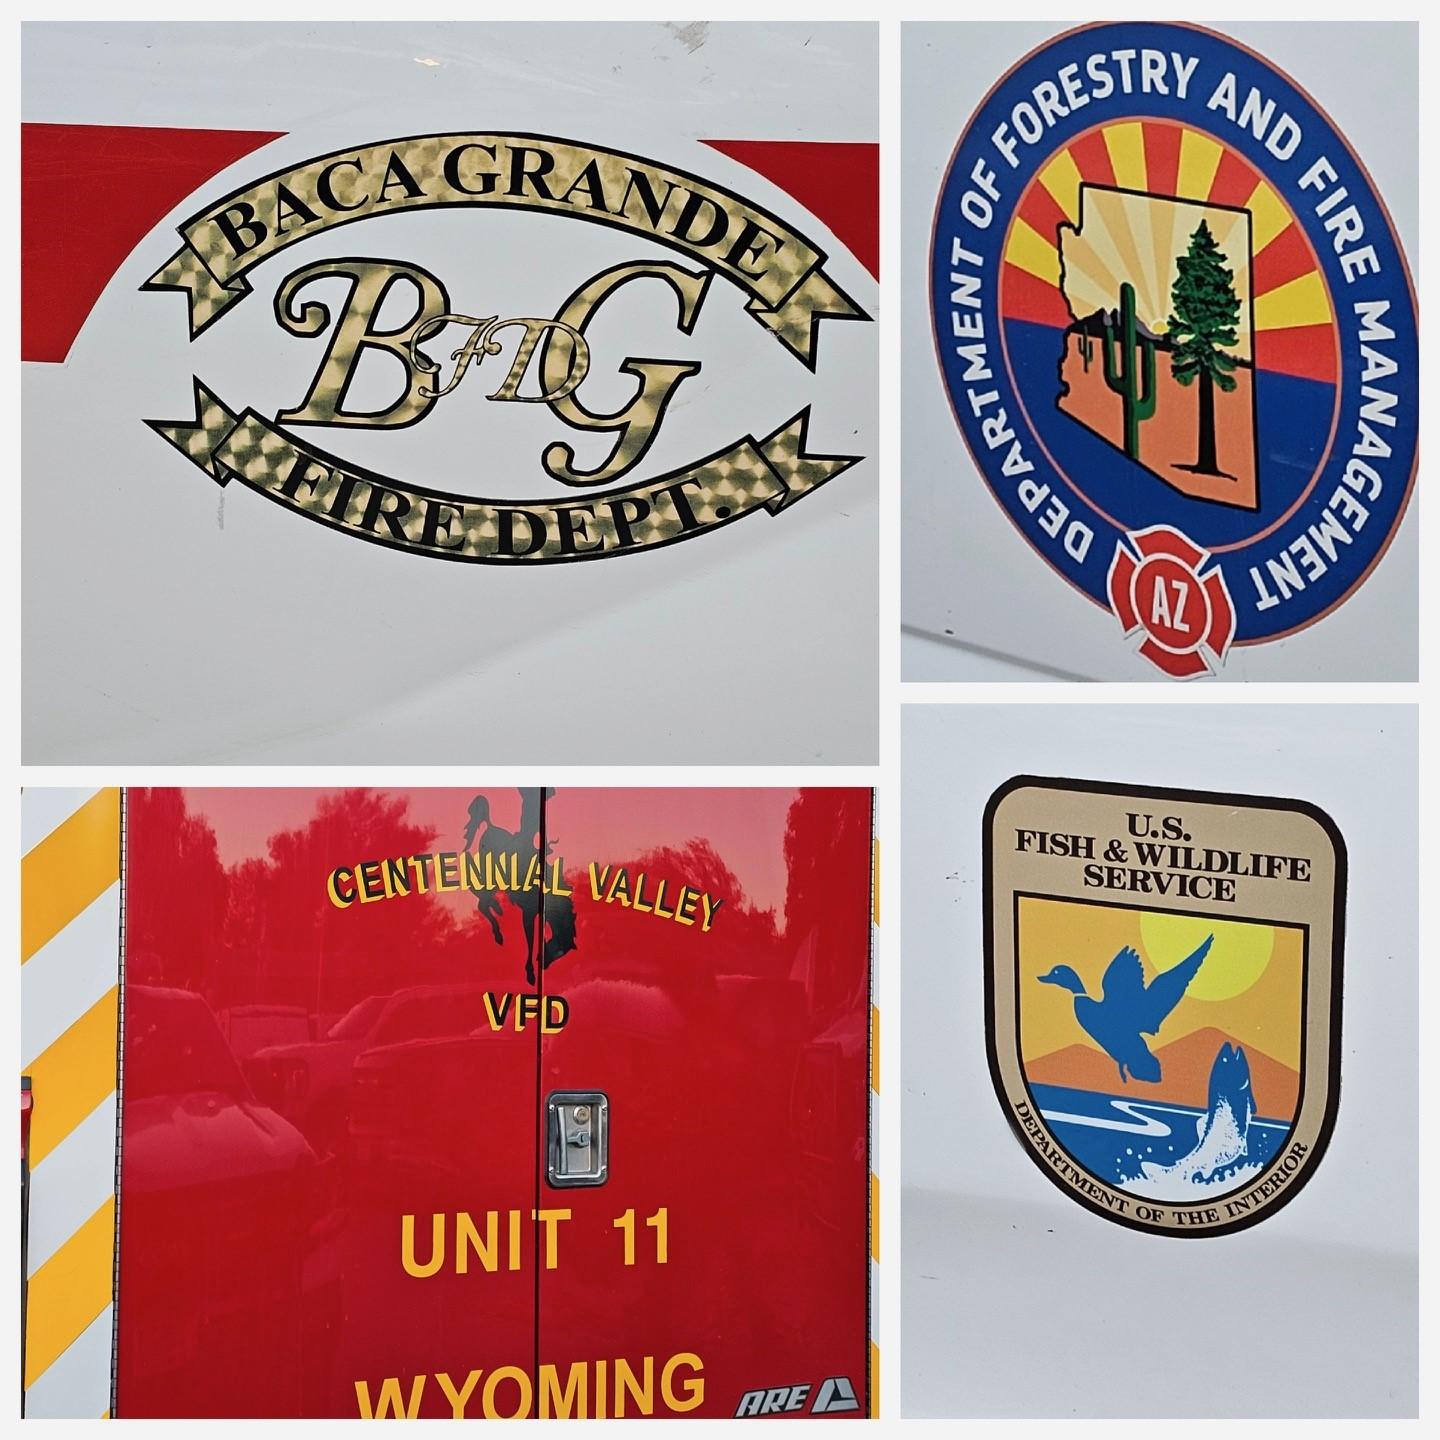 some agency logos that are supporting Saint Charles Fire suppression efforts.